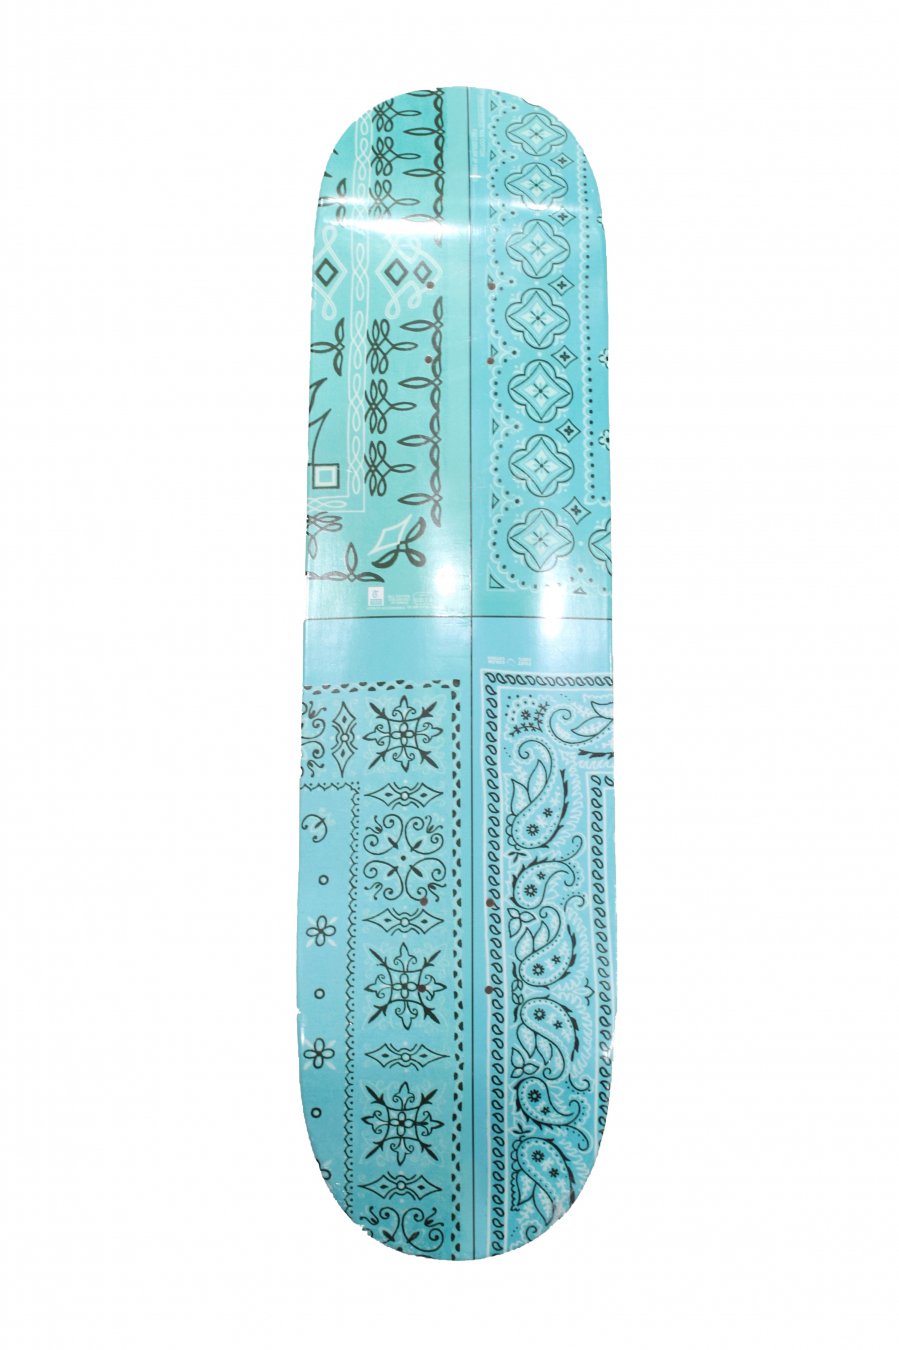 Children of the discordance  21ss SKATE DECK(Turquoise)<img class='new_mark_img2' src='https://img.shop-pro.jp/img/new/icons15.gif' style='border:none;display:inline;margin:0px;padding:0px;width:auto;' />